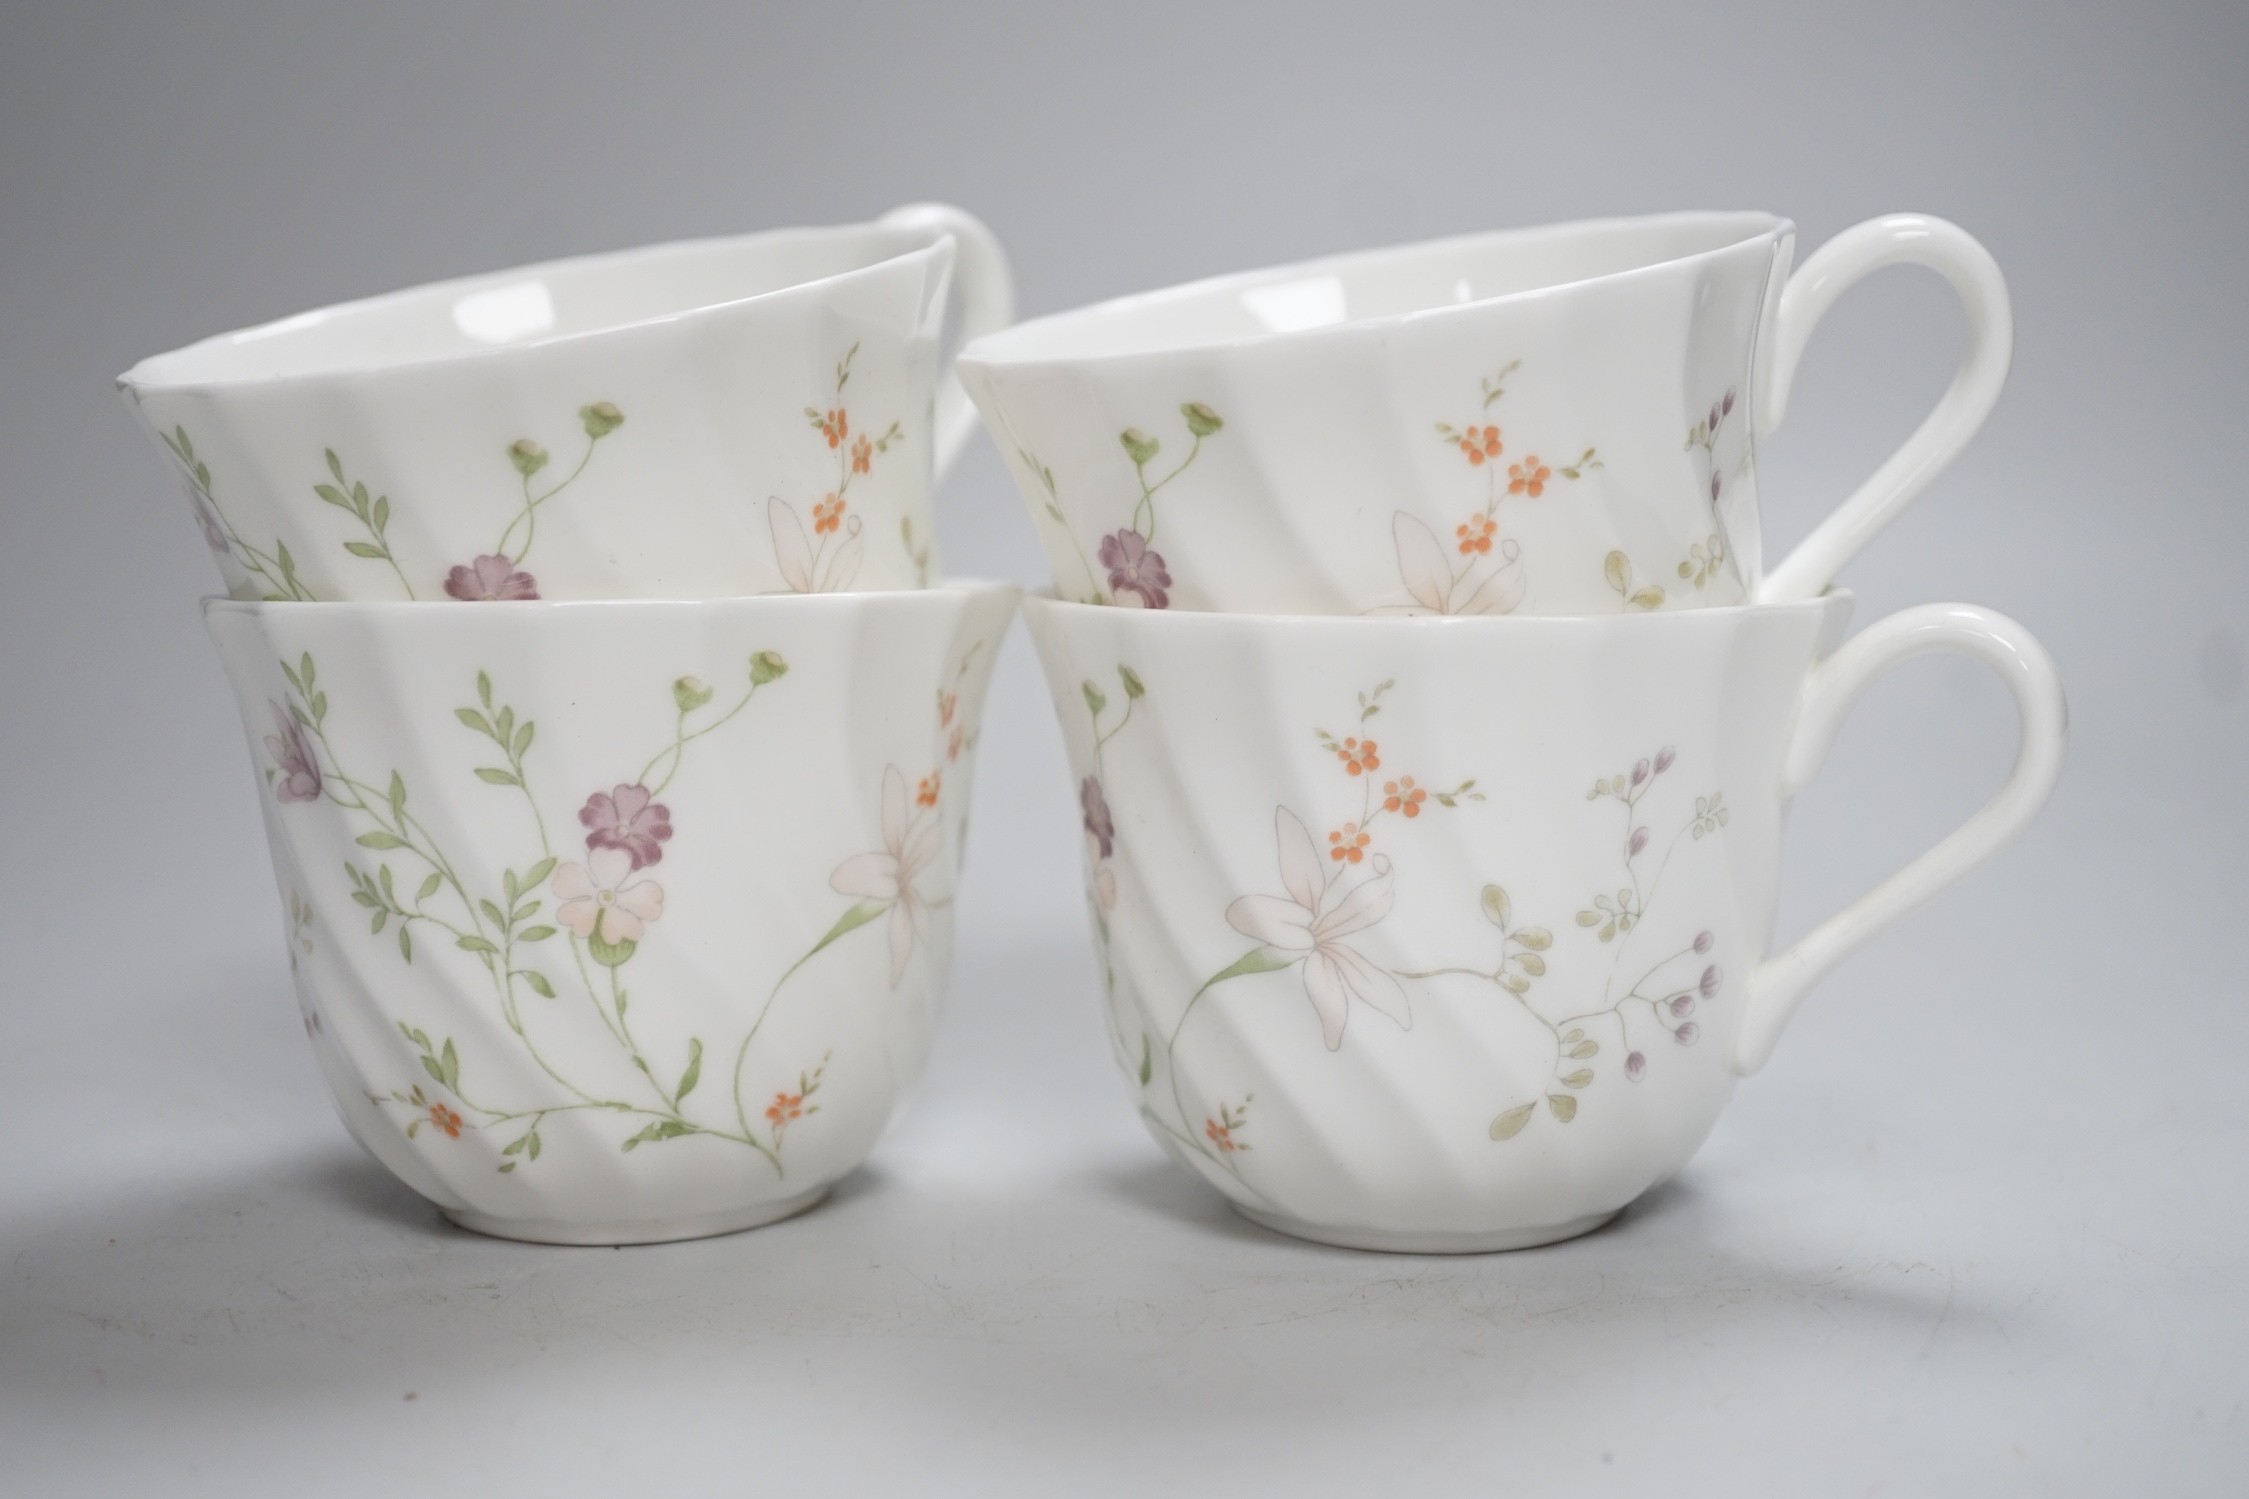 A Wedgwood Campion-pattern part breakfast service, and a Caprice Elizabethan teaset